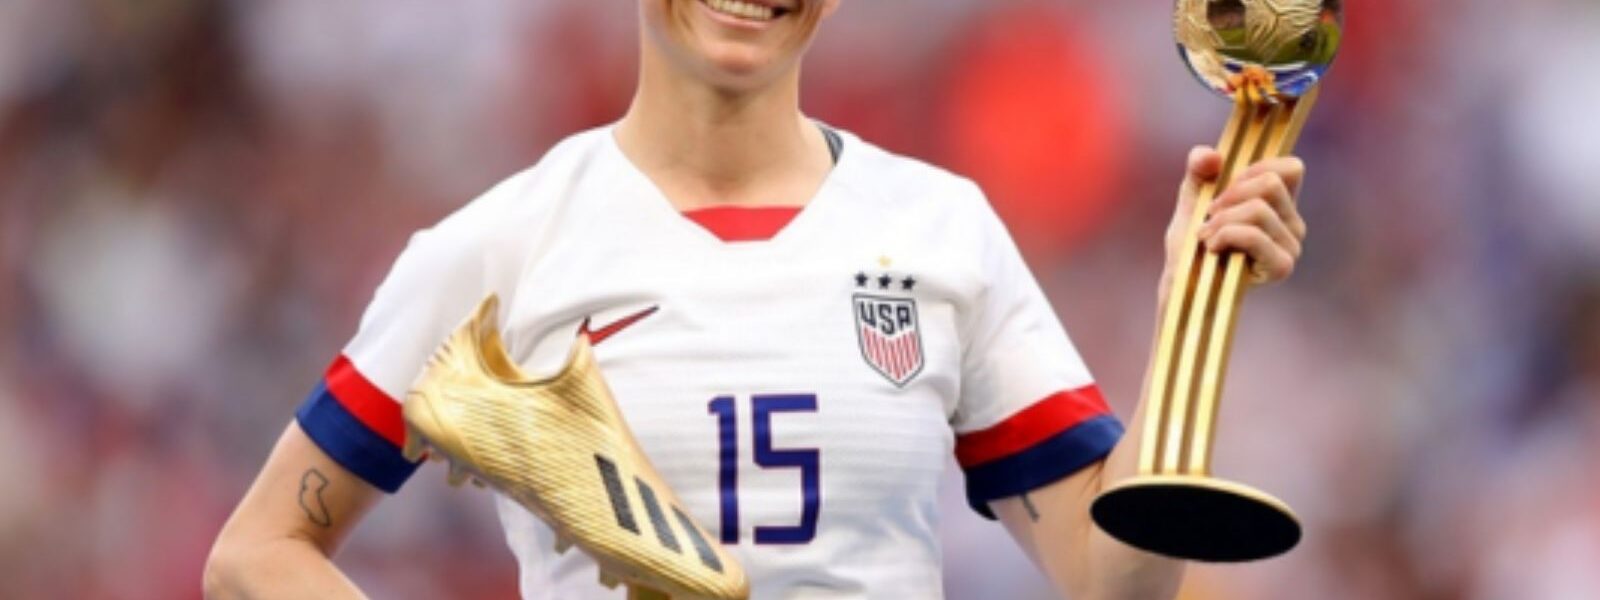 BREAKING: Megan Rapinoe has been disqualified from the soccer Hall of Fame